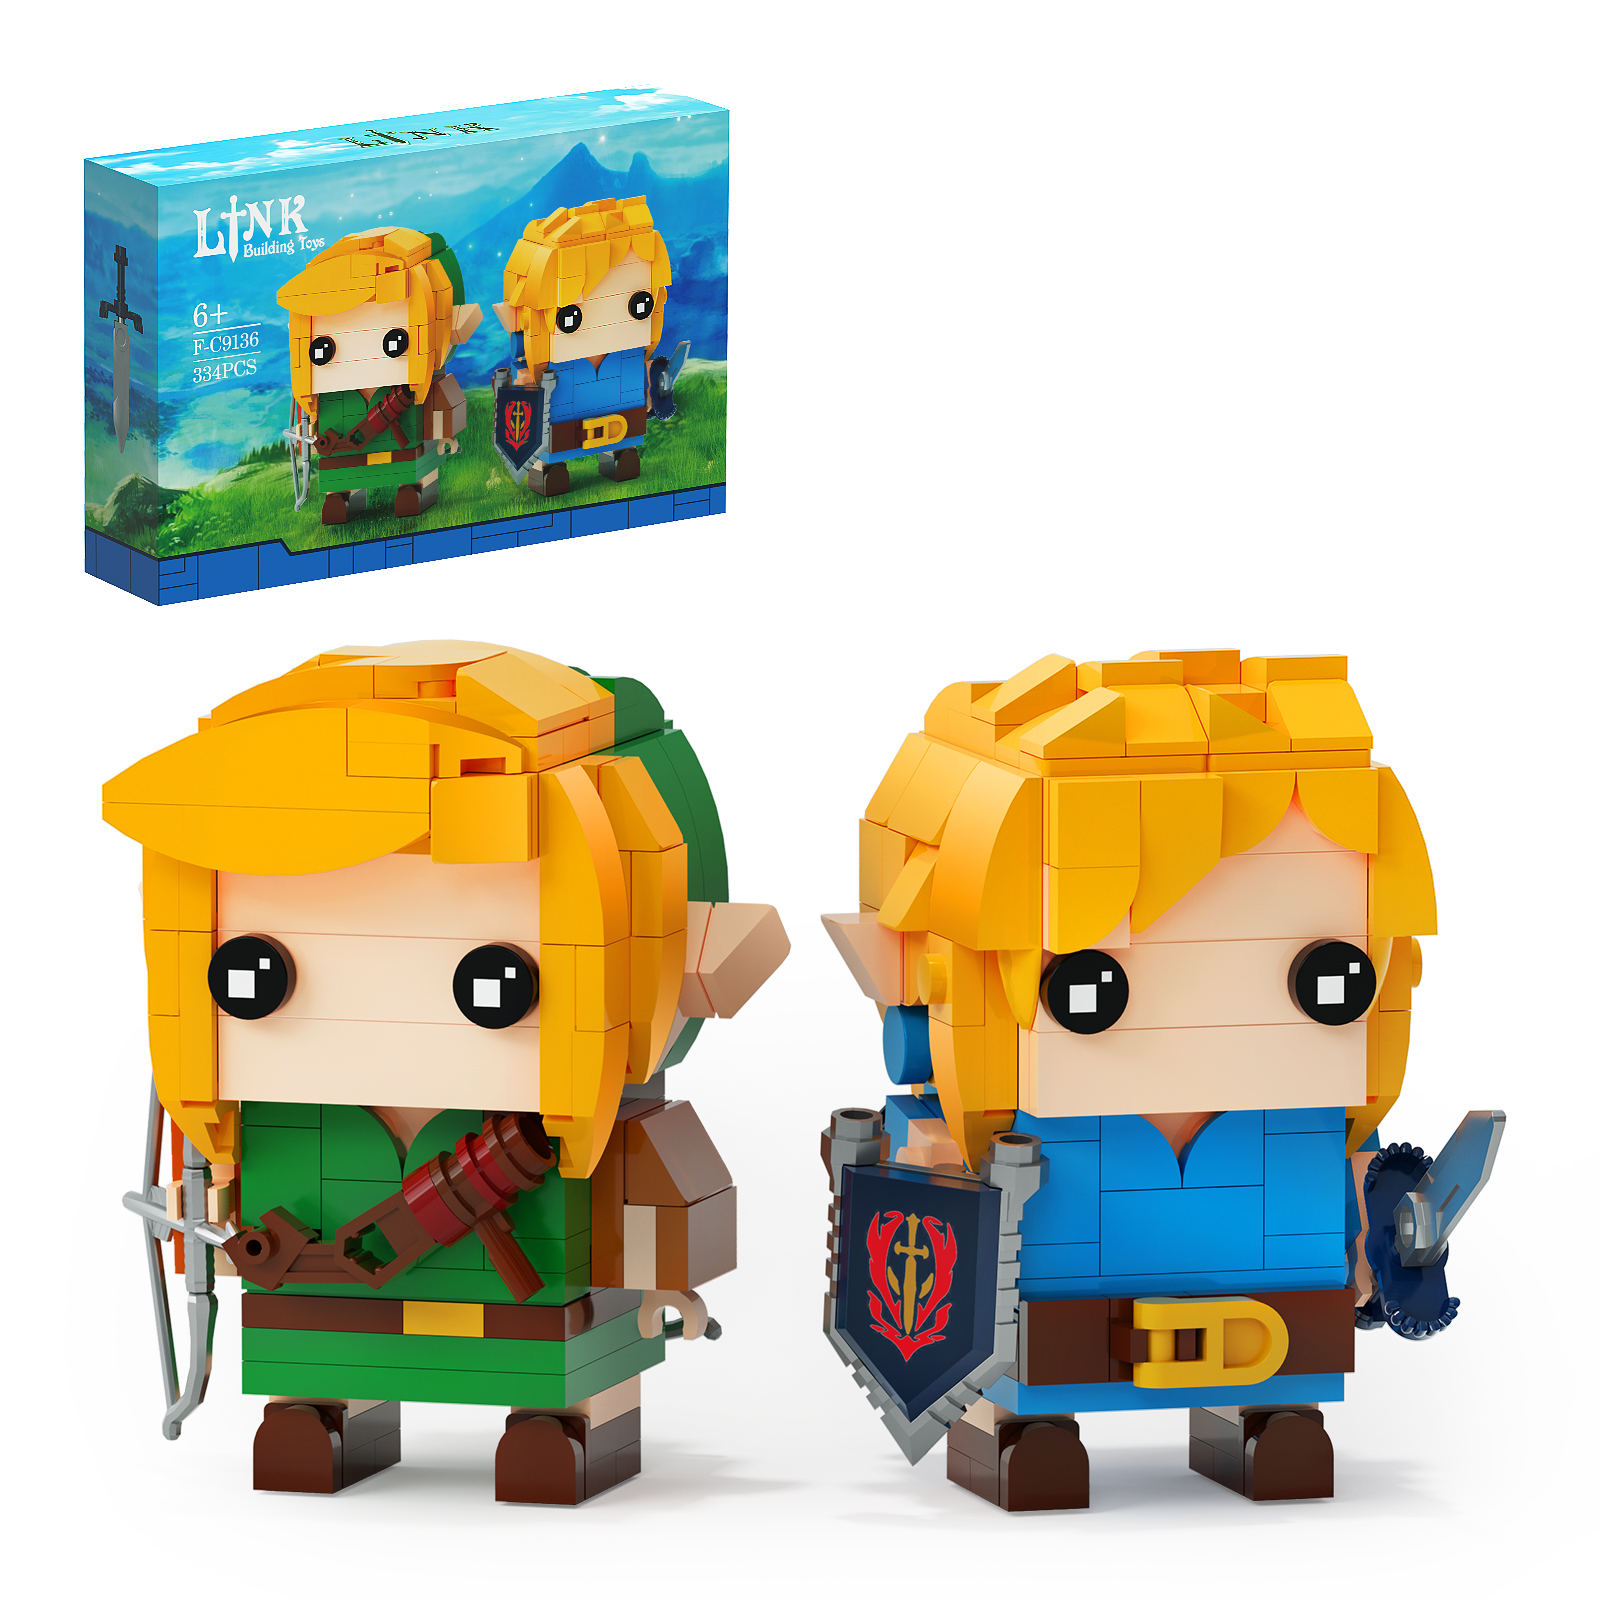 BuildMoc Breath Of The Wild Brickheadz Link Building Block Set For Zeldaed Character Collection Toys For 1 - Zelda Plush